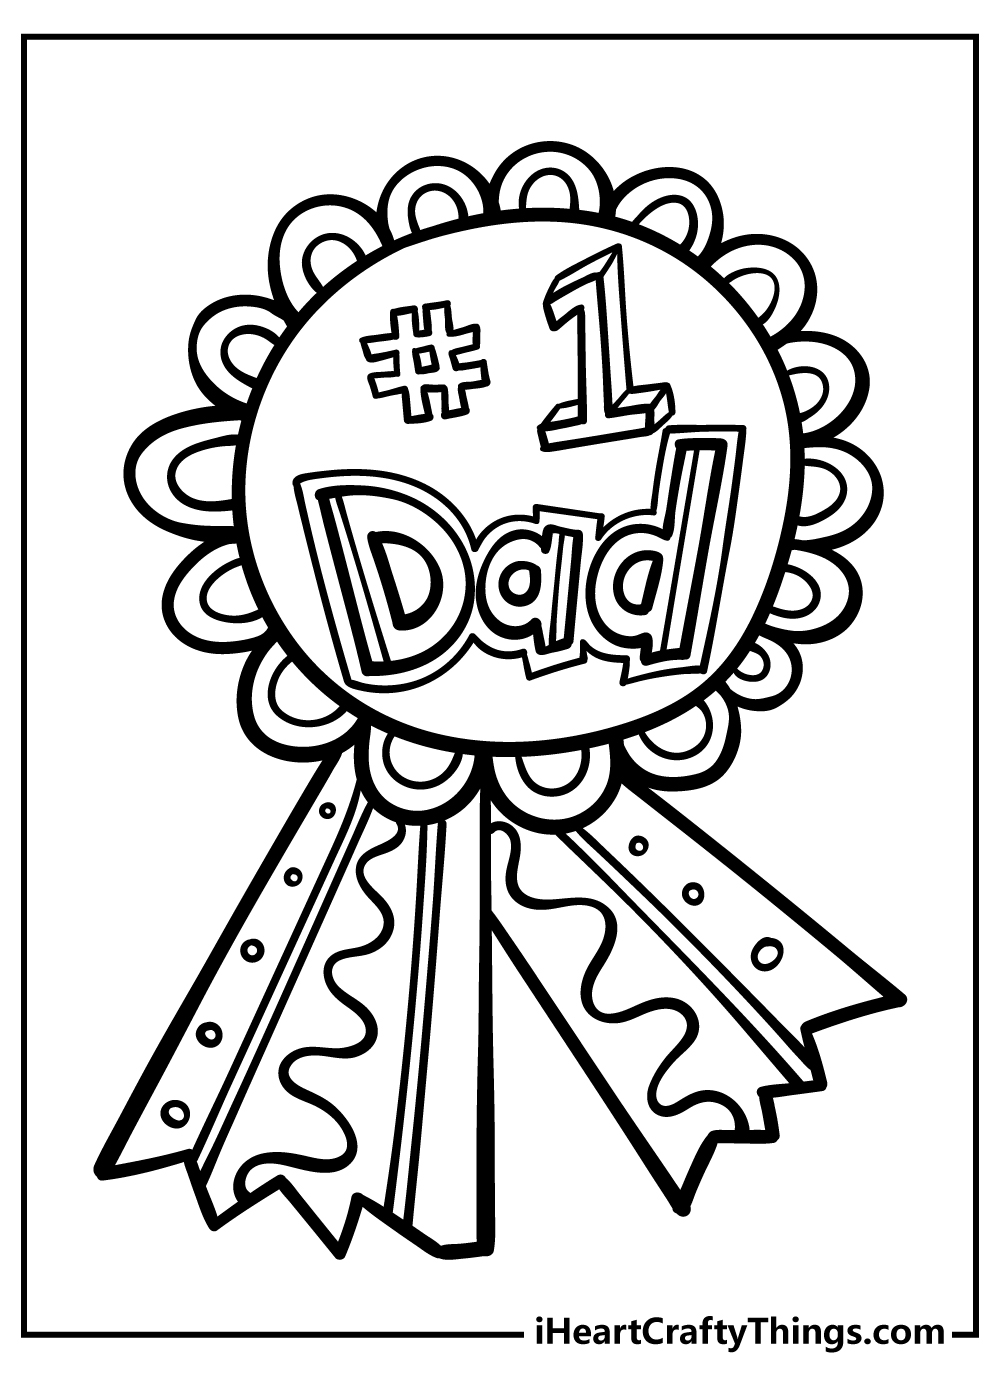 Father’s Day Coloring Book for adults free download